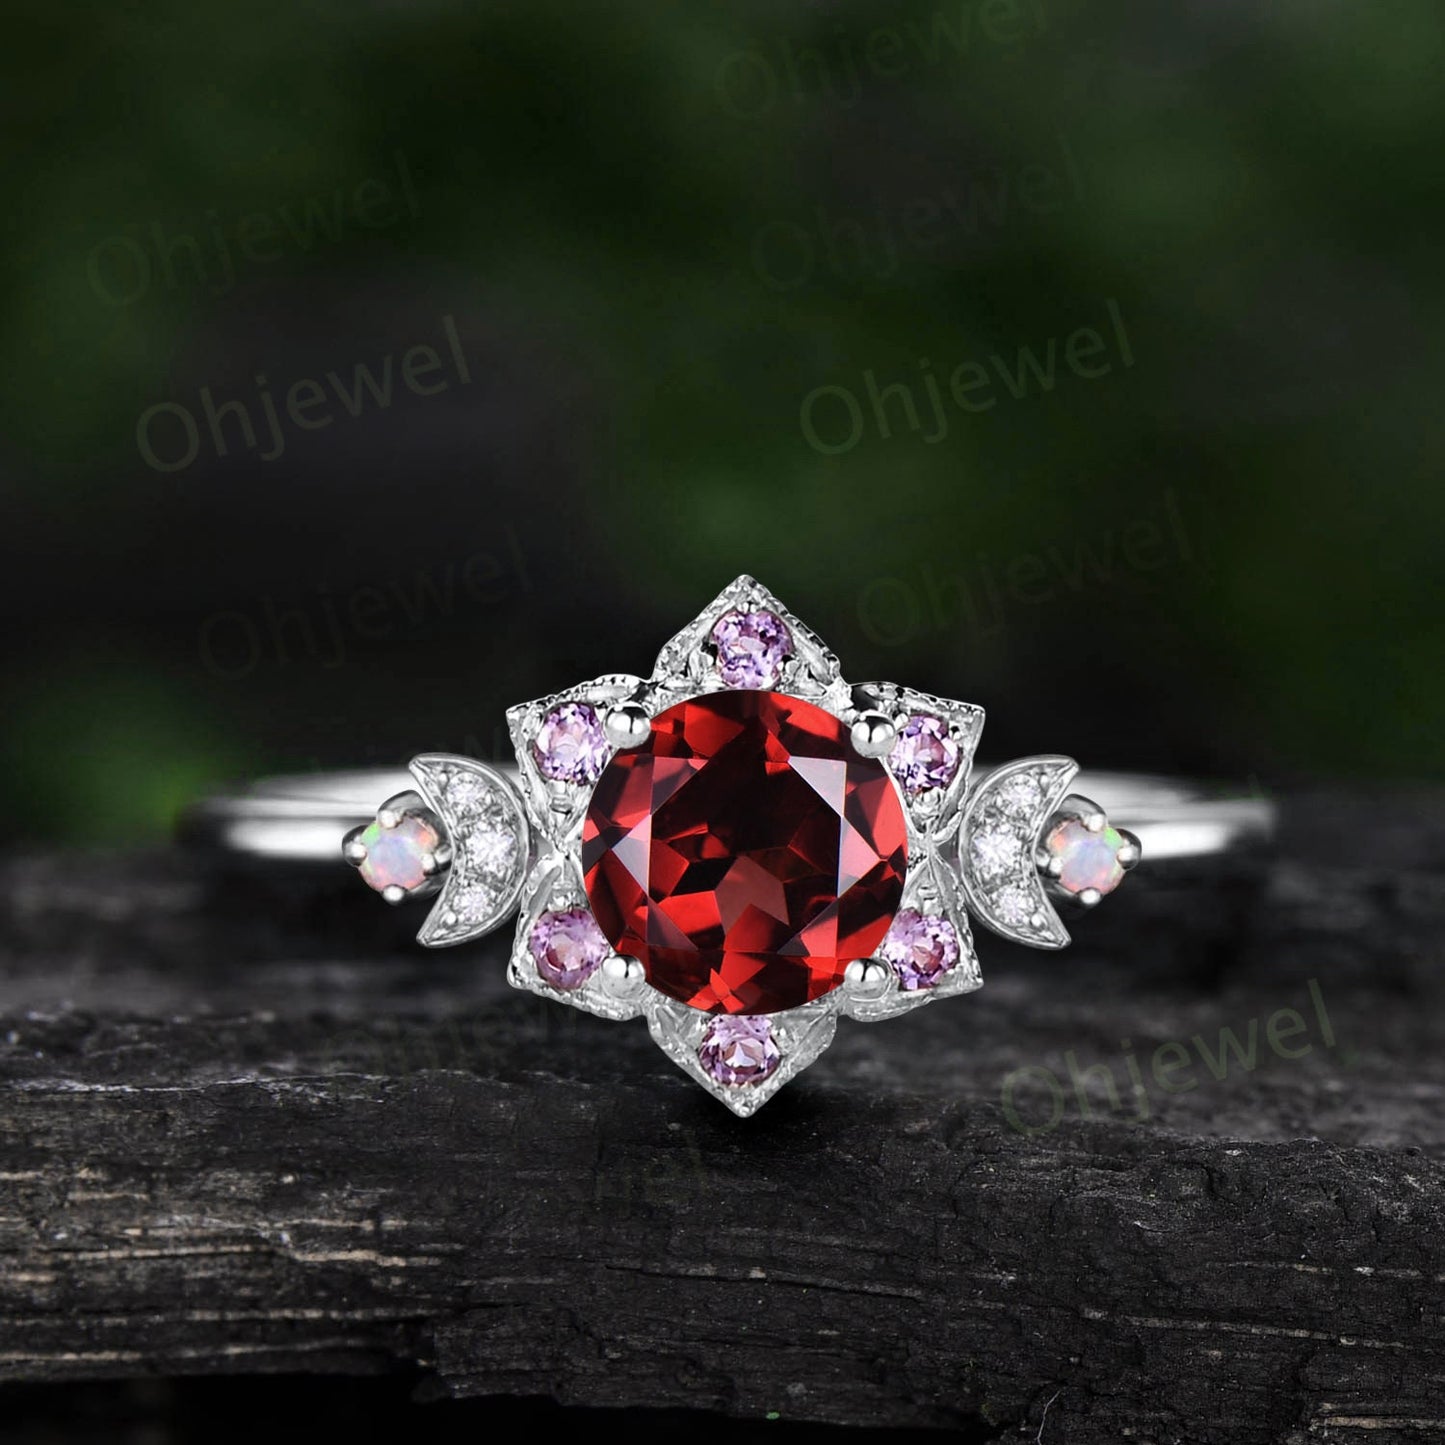 Vintage round red garnet engagement ring 14k yellow gold milgrain floral moon halo amethyst opal ring women unique bridal promise ring gift